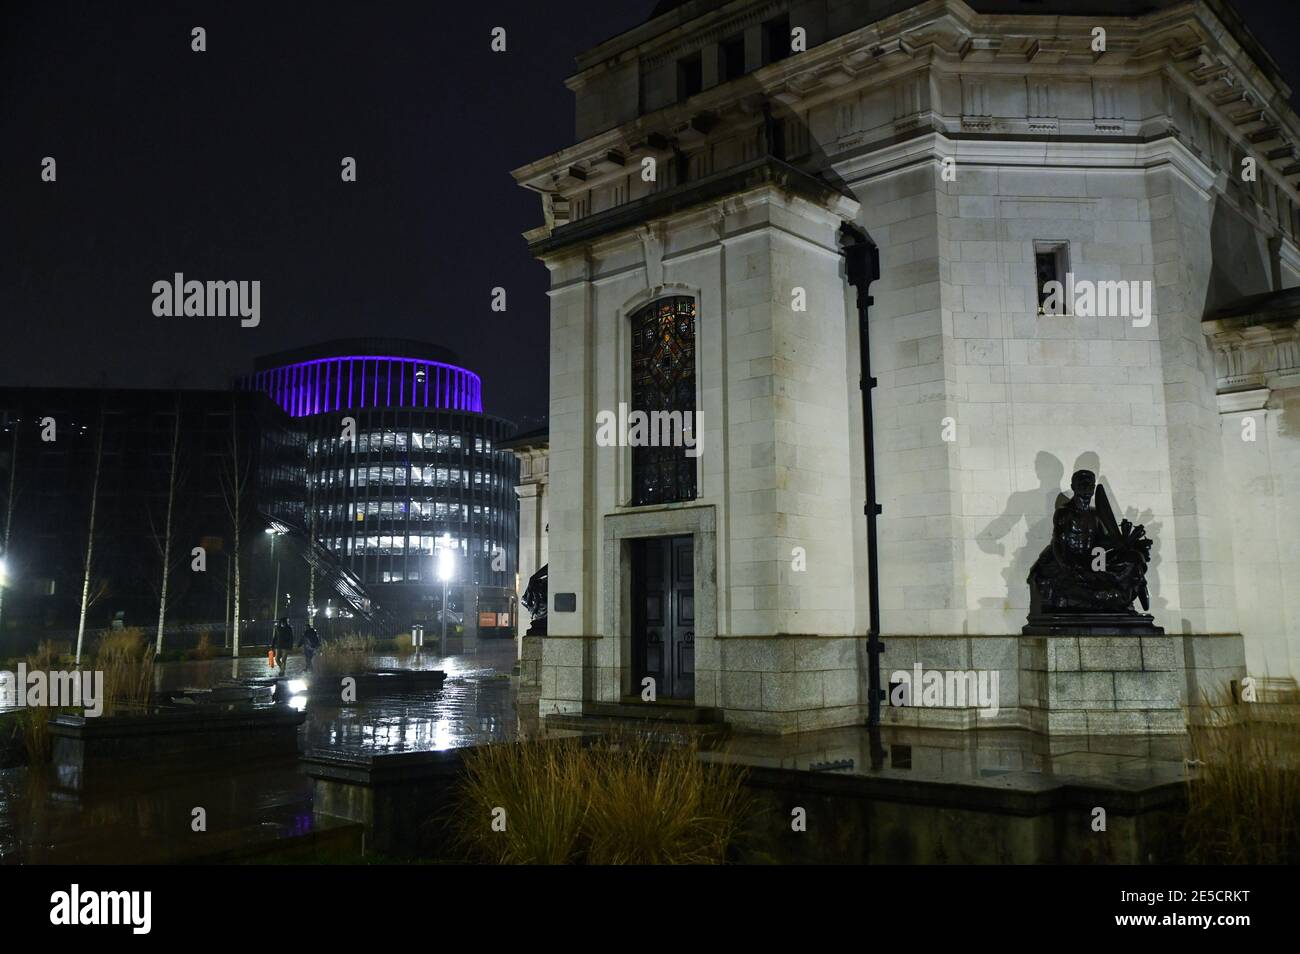 Birmingham, UK. 27th Jan, 2021. Buildings were lit up purple to mark the Holocaust Memorial Day this evening. A new office block in the Paradise development stands beyond Birmingham's Hall of Memory illuminated its building with purple lighting as they took part in 'Light The Darkness' Pic by Credit: Sam Holiday/Alamy Live News Stock Photo